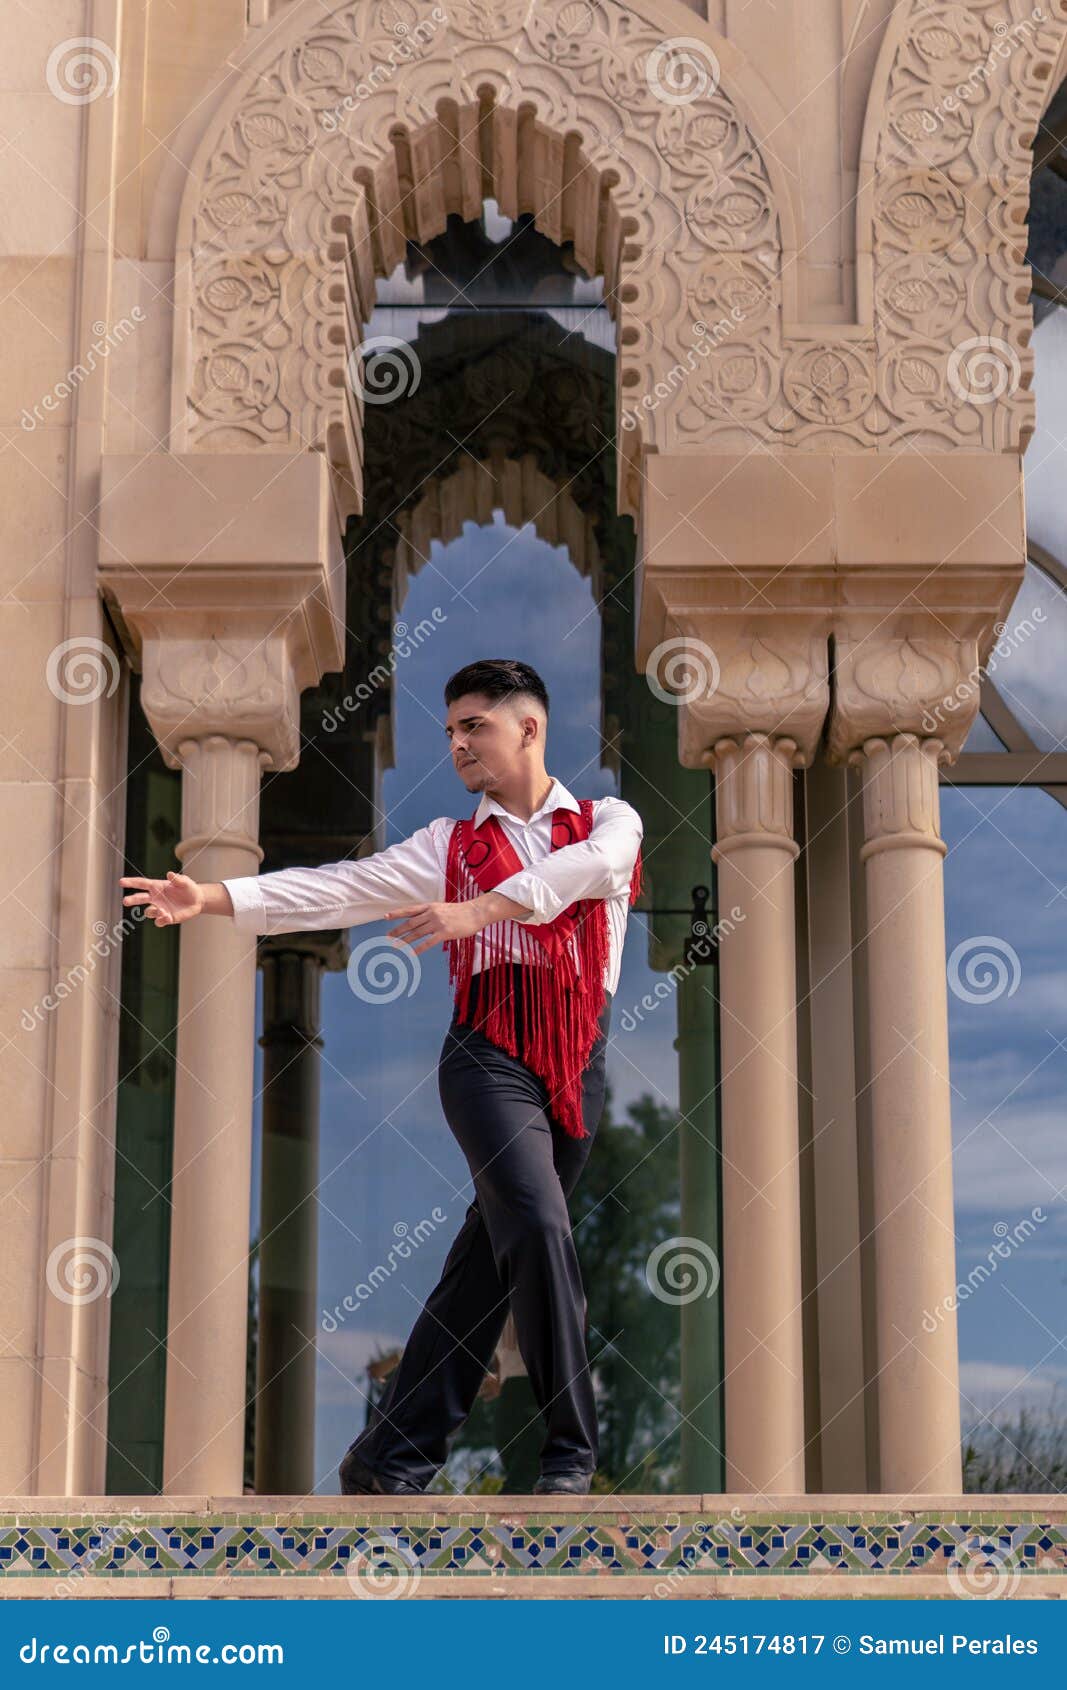 young male flamenco dancer in white shirt and red mantillo dancing